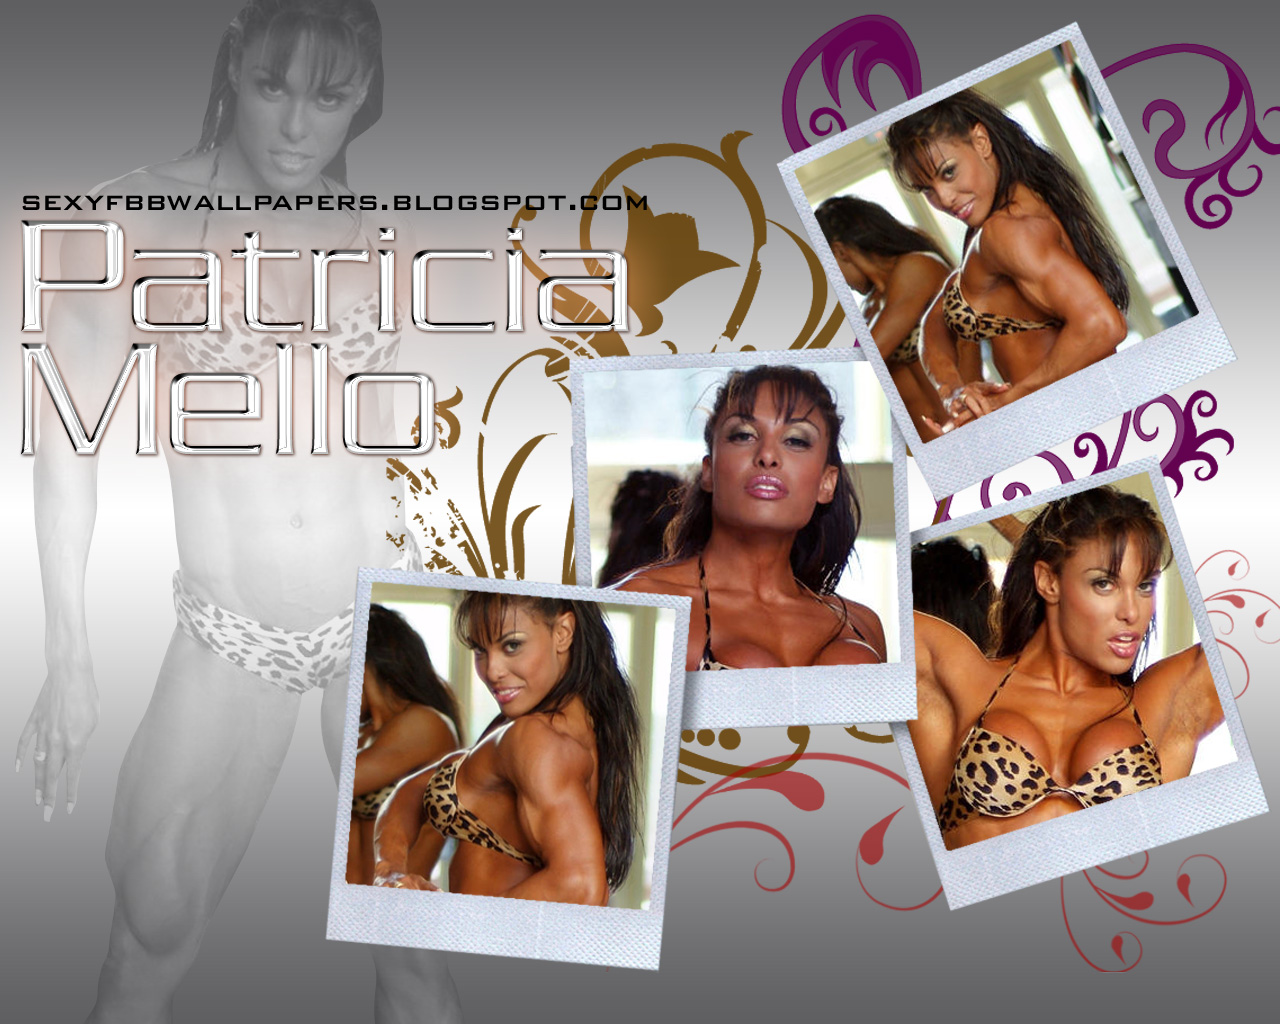 ... Pro Figure and Fitness Model Patricia Mello WallPaper | FBB Wallpapers